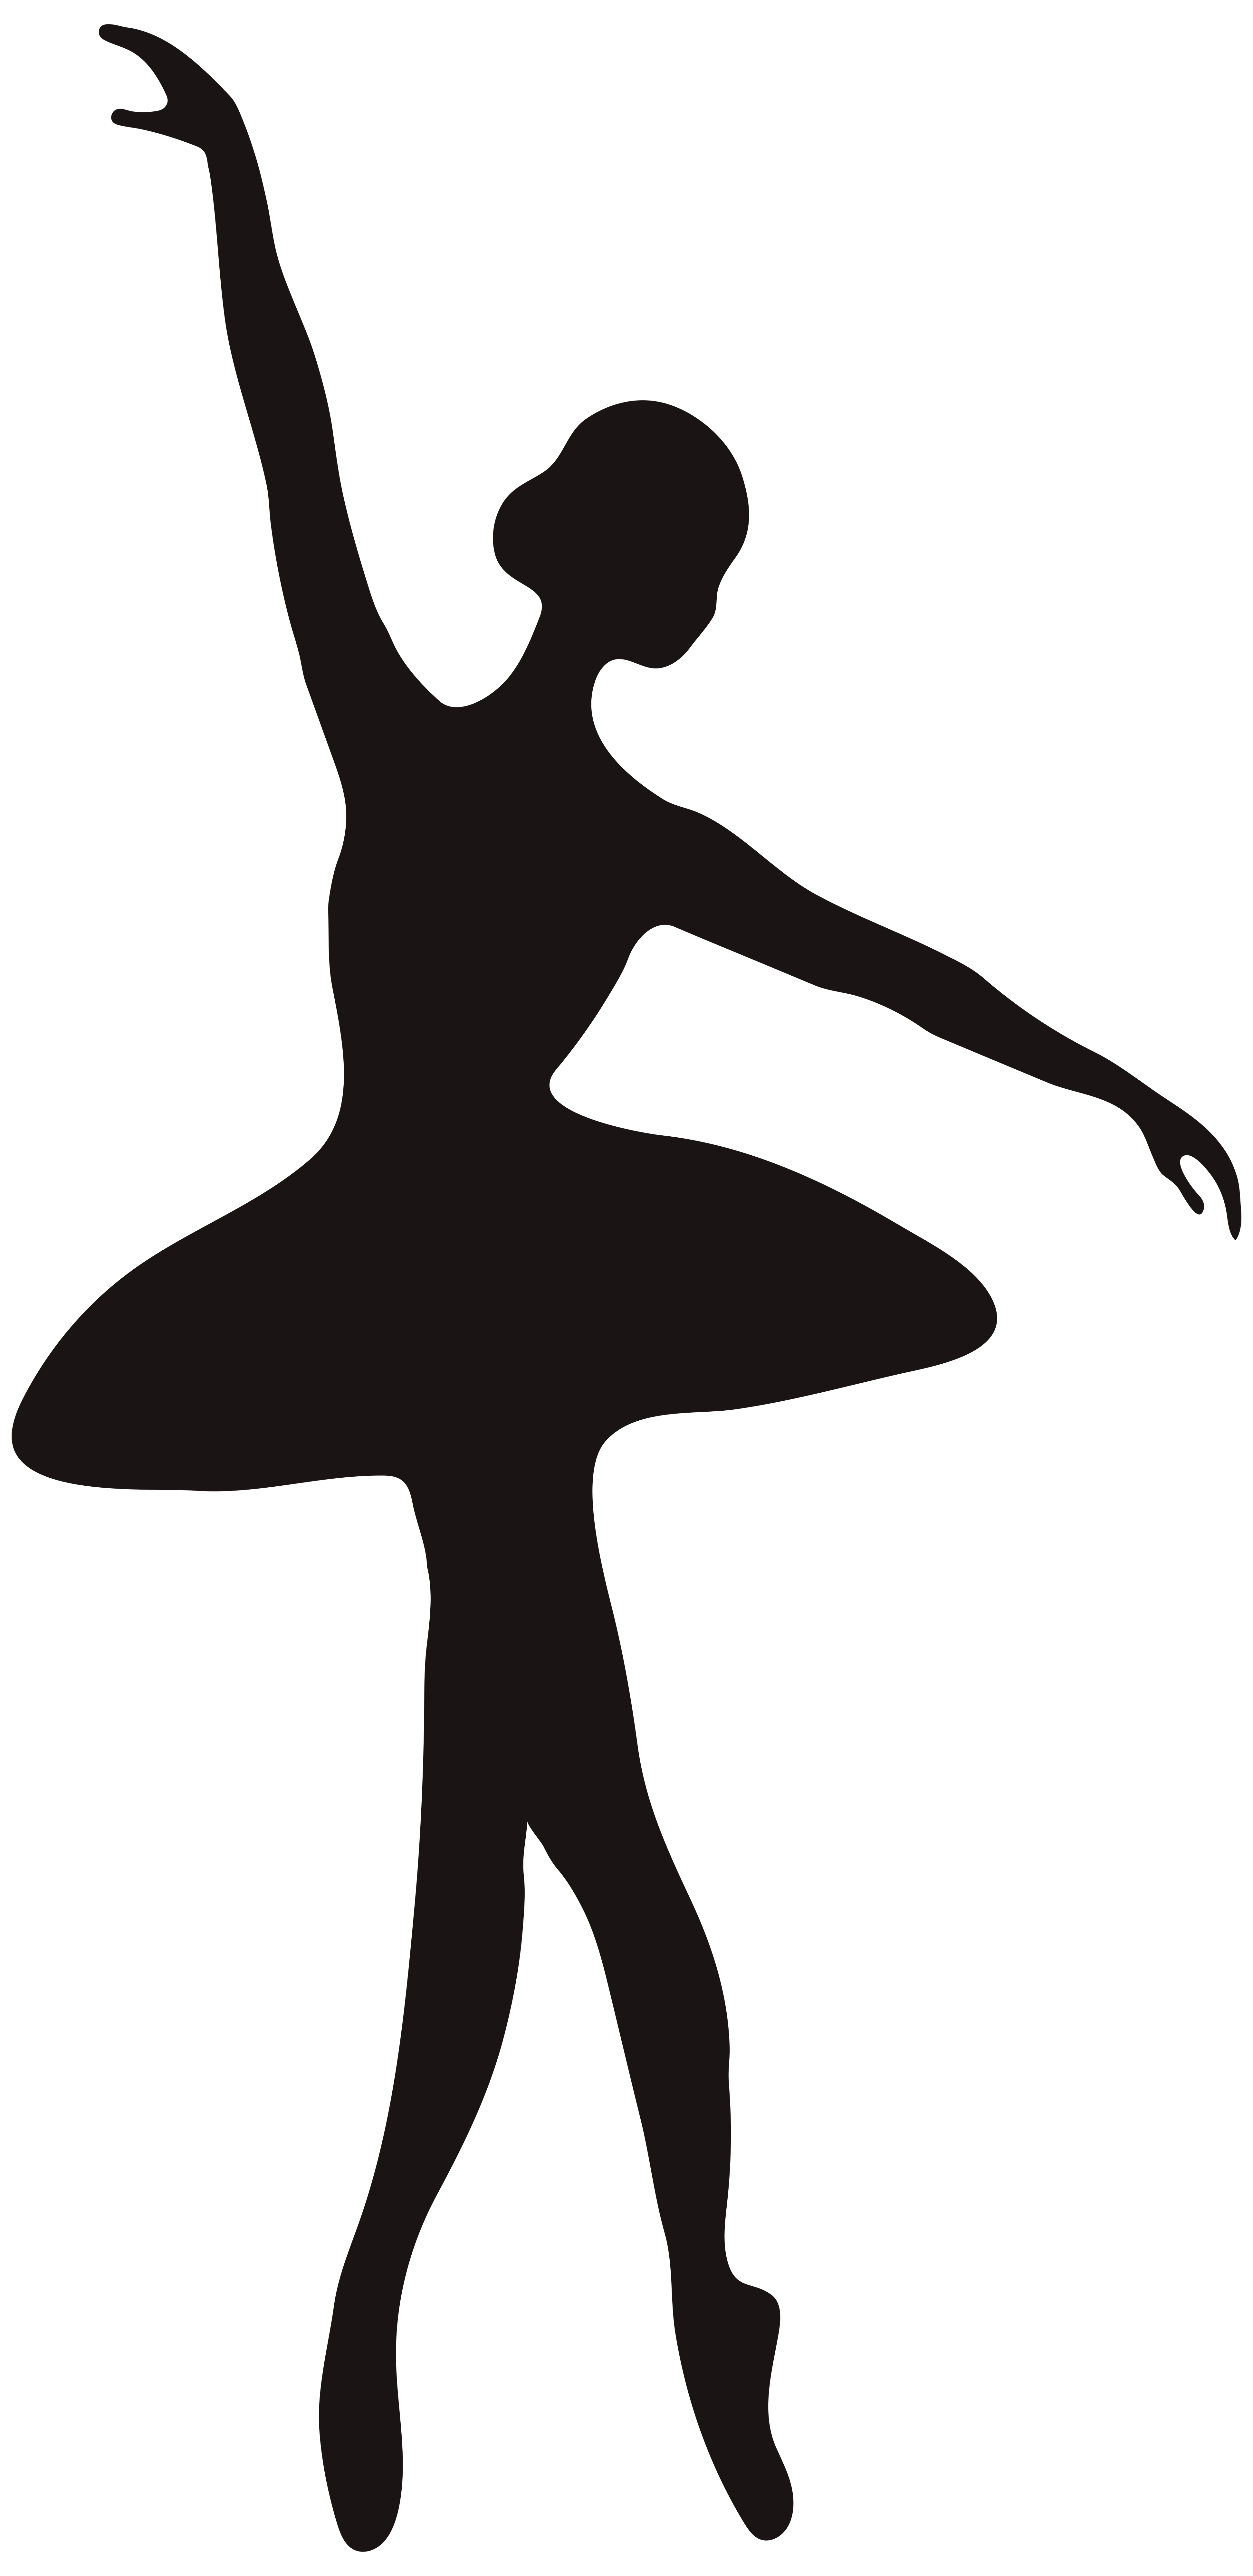 Ballerina Silhouette PNG Clip Art Image​-Quality Image and Transparent PNG Free Clipart